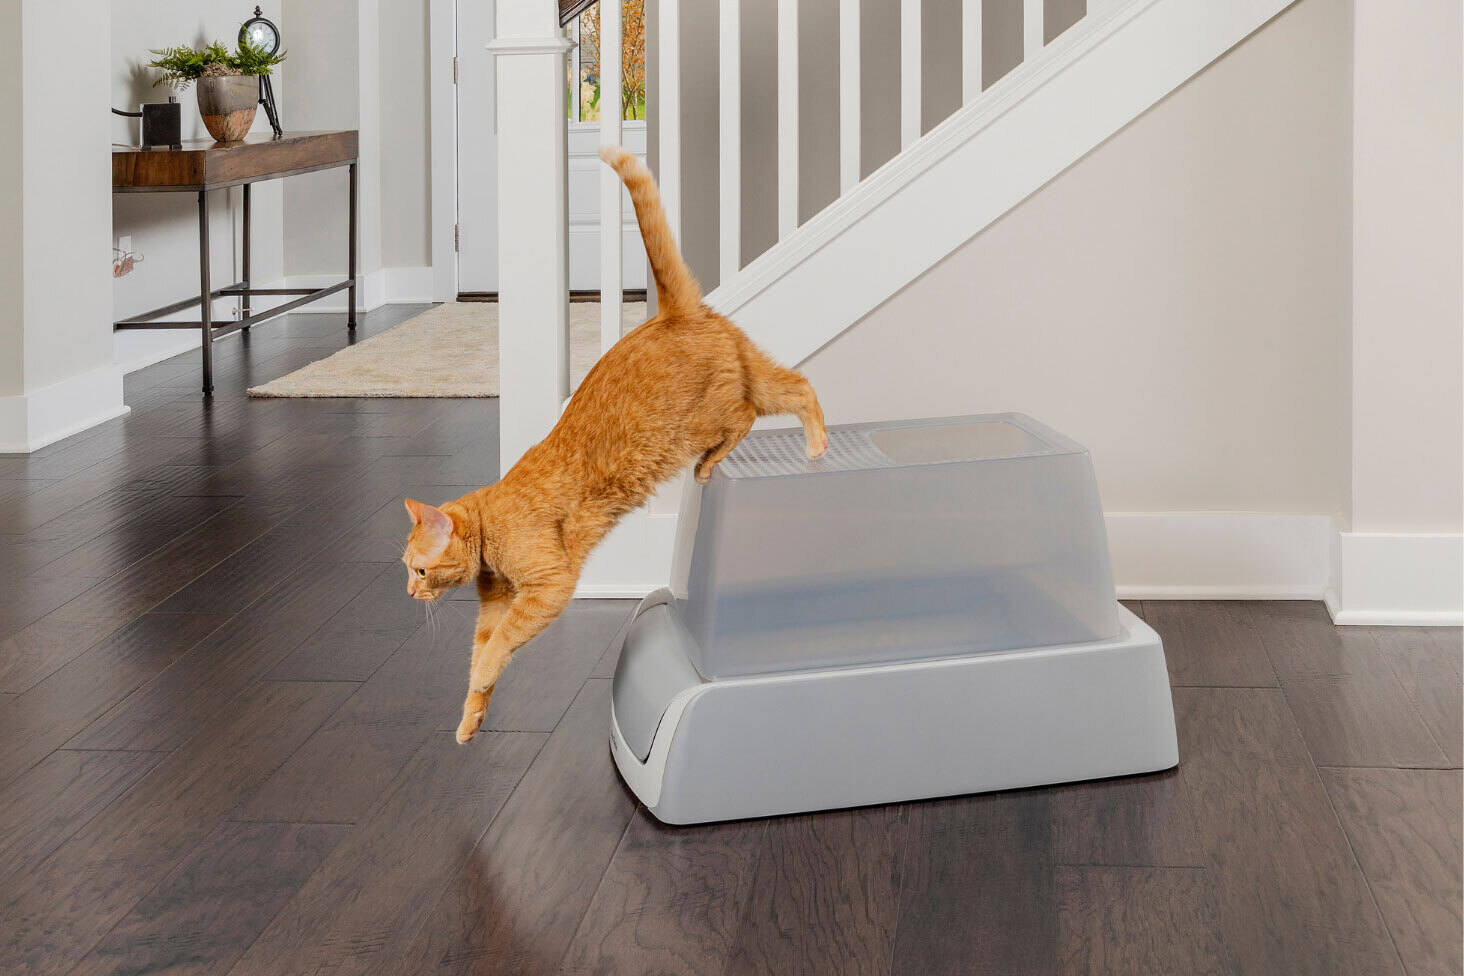 Tips for Keeping Cat Litter From Tracking | PetSafe®